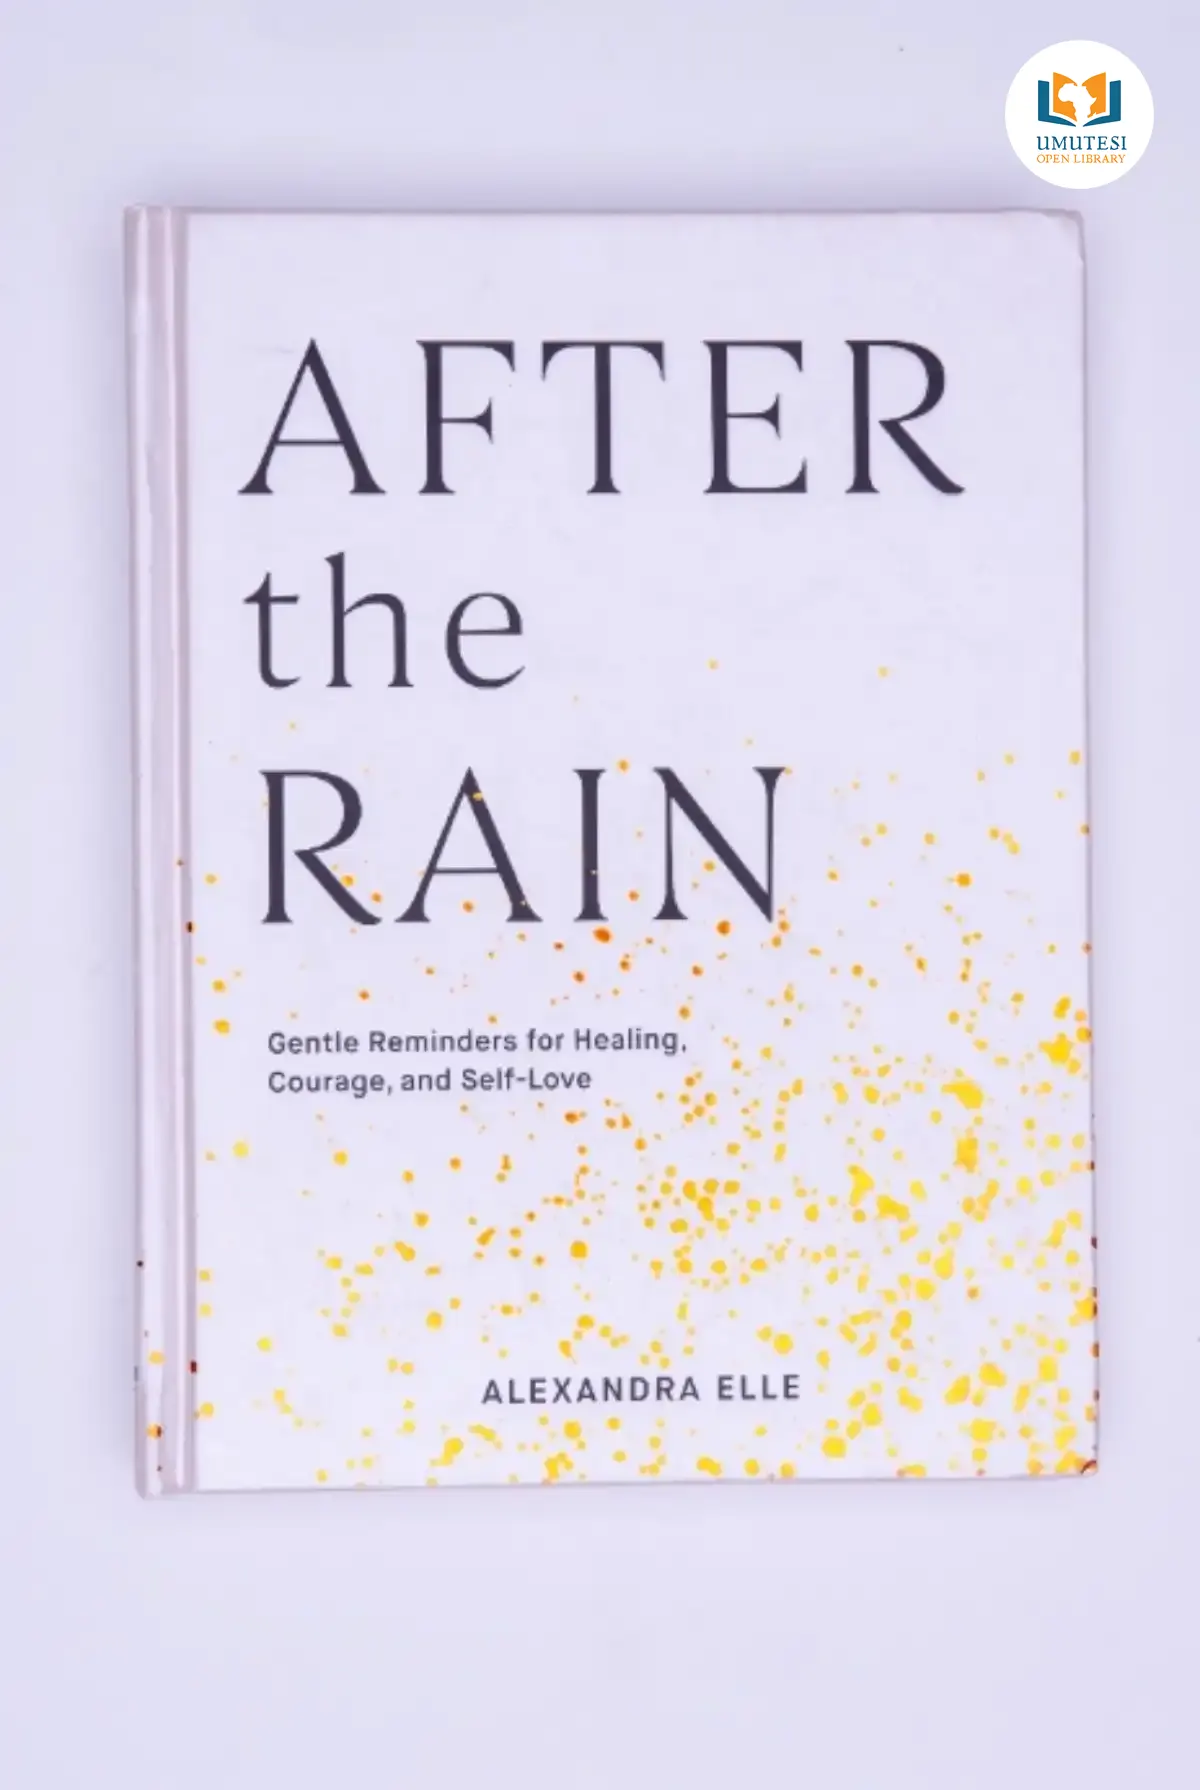 After the Rain: Gentle Reminders for Healing, Courage, and Self by Alexandra Elle